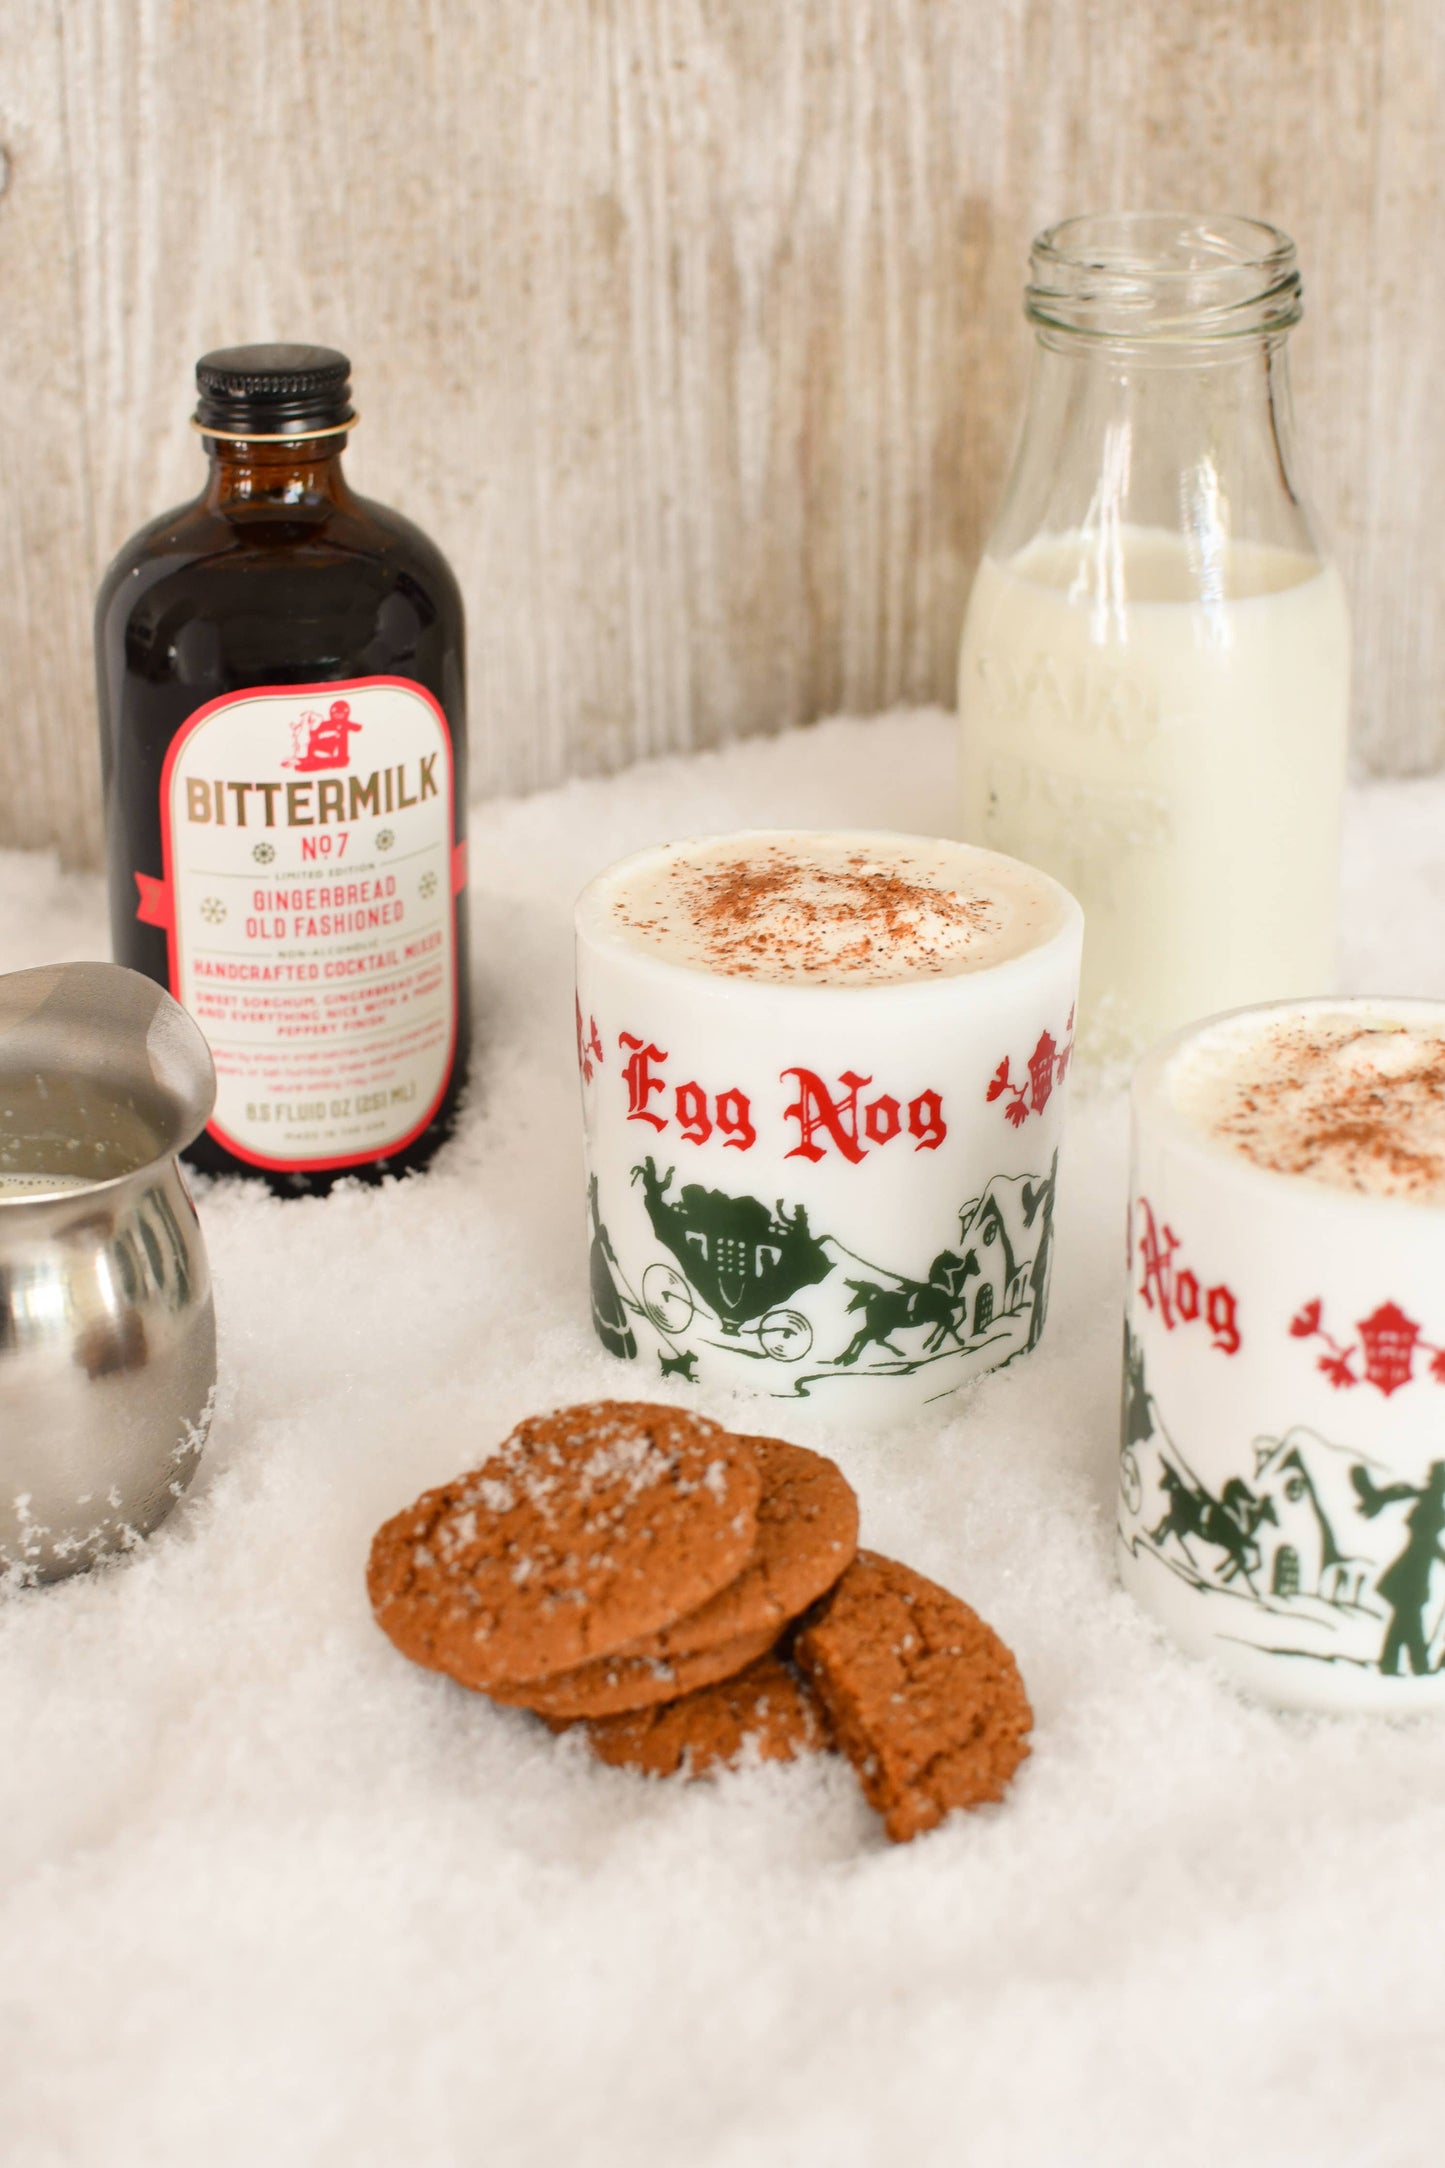 Bittermilk No.7 Limited Edition - Gingerbread Old Fashioned